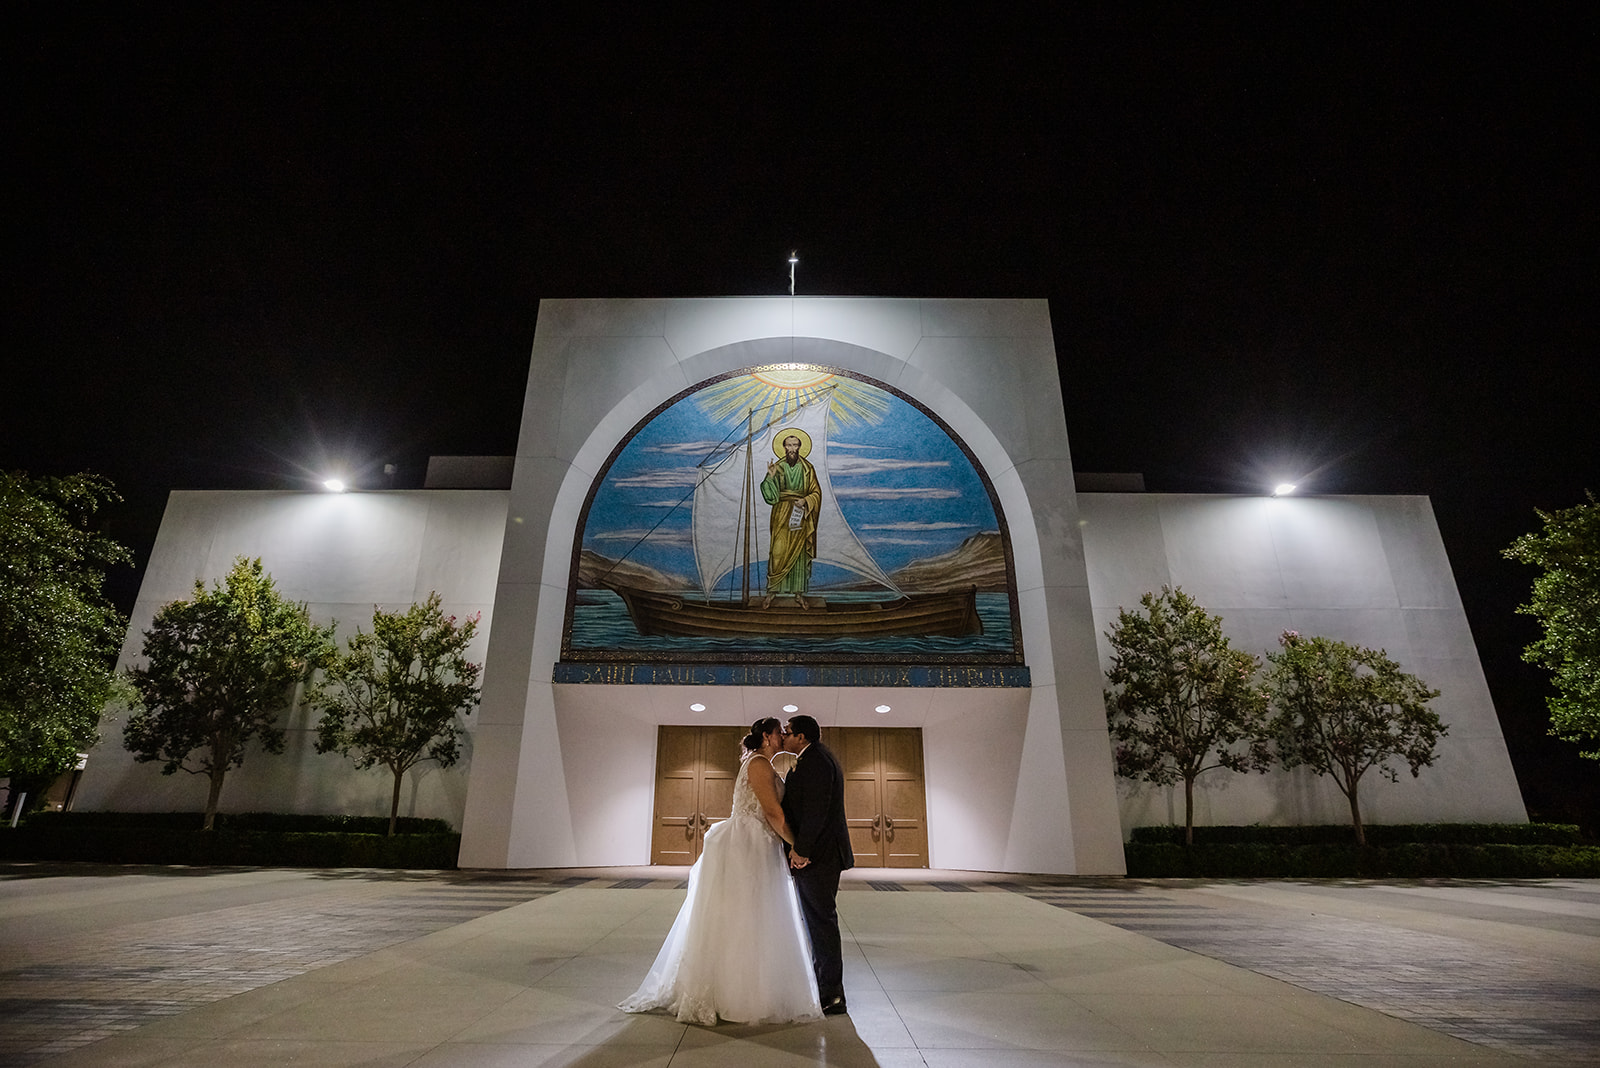 Bride and groom take nighttime photo after their wedding reception in front of St Paul's in Irvine, CA